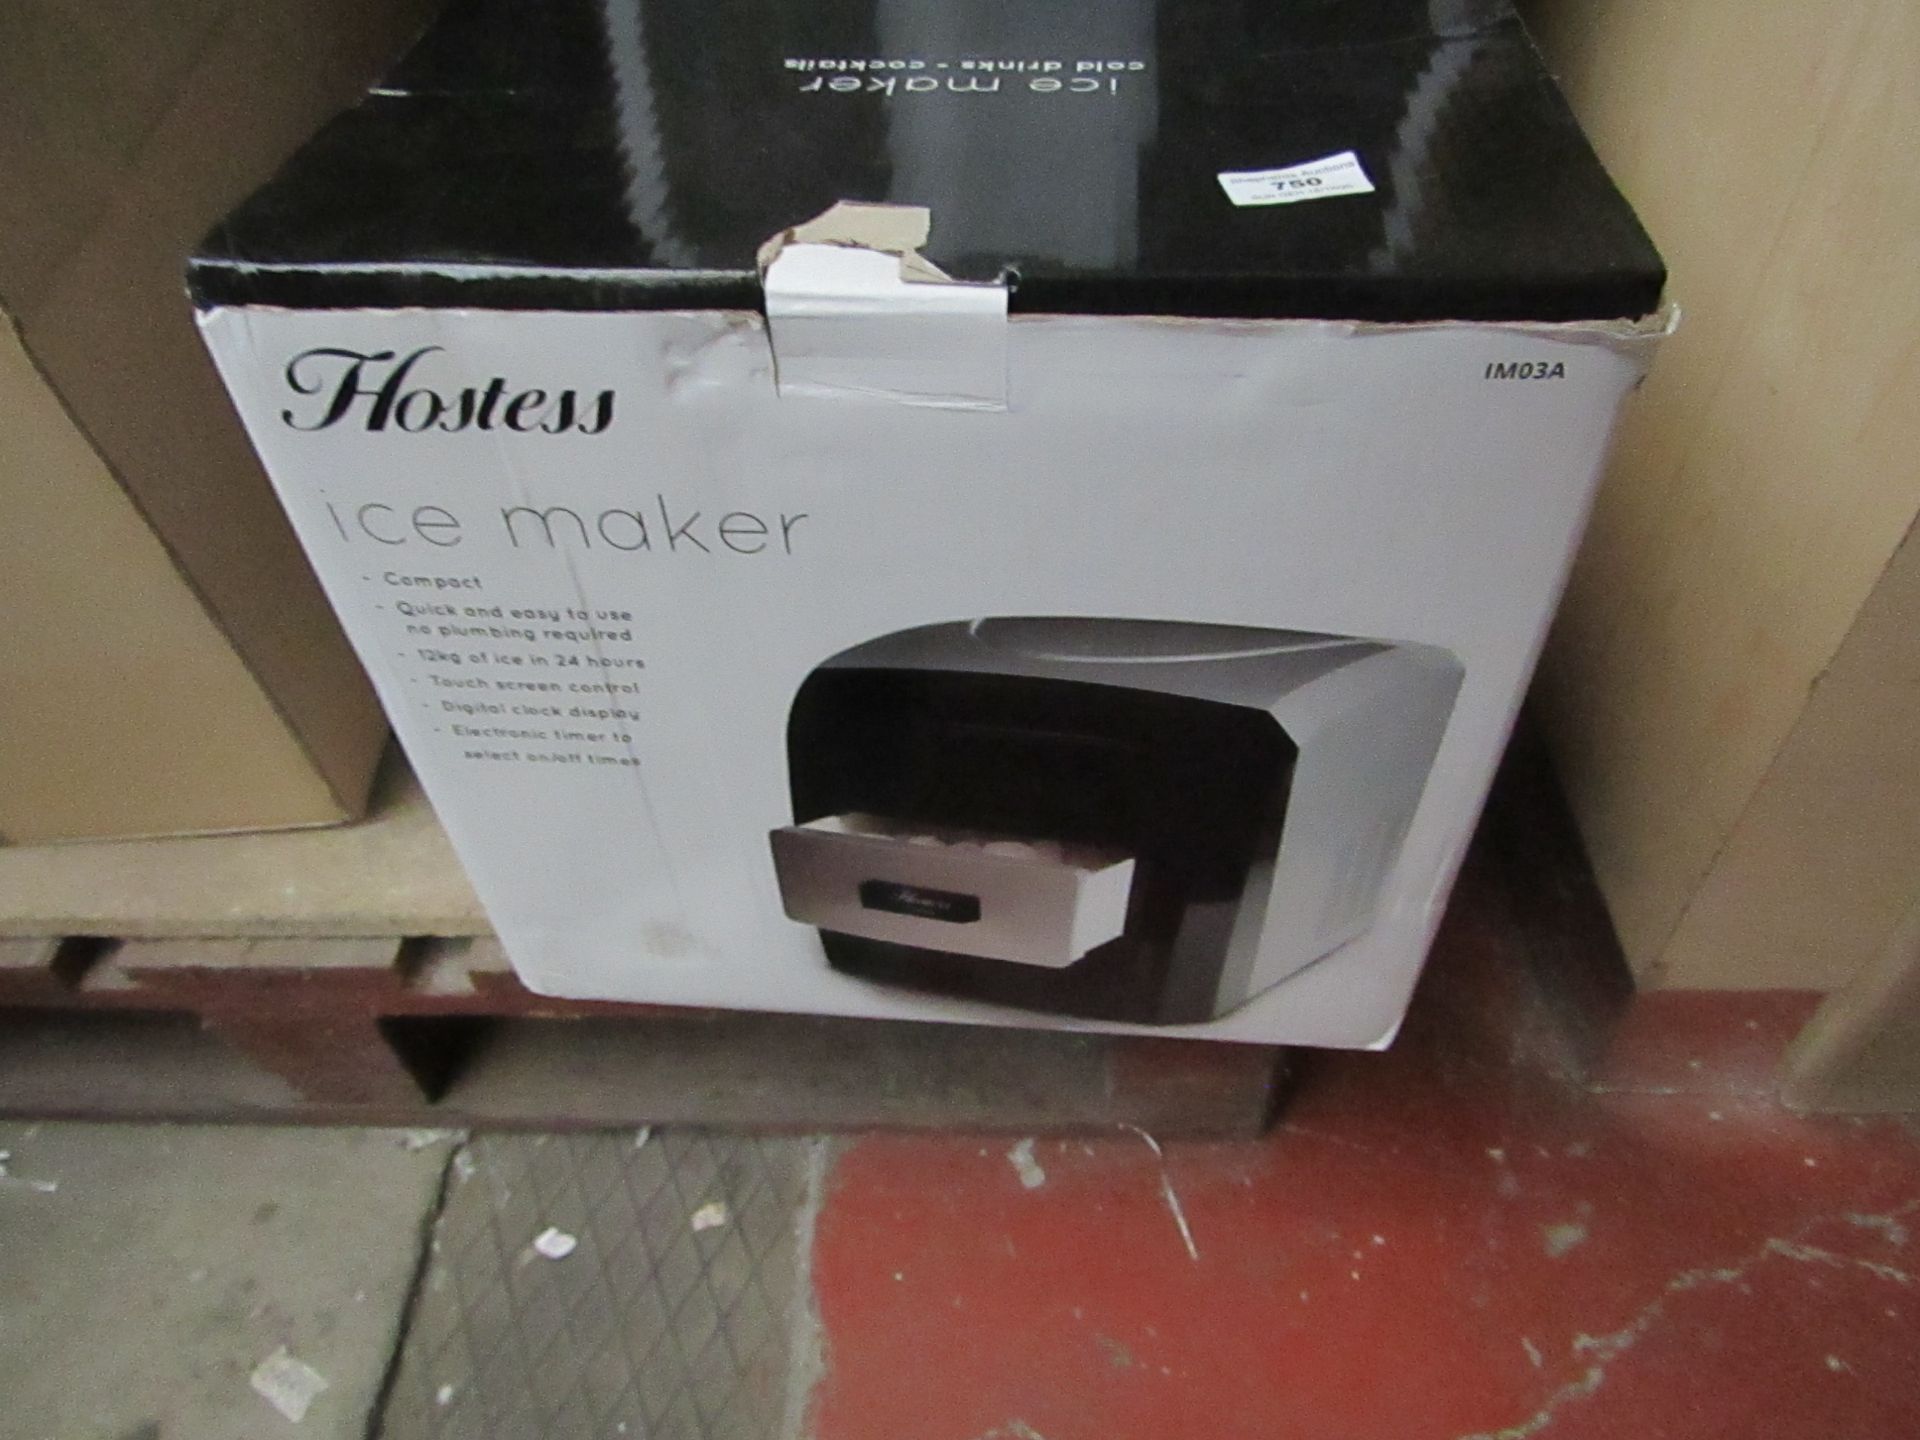 Hostess Ice Maker. Boxed but untested